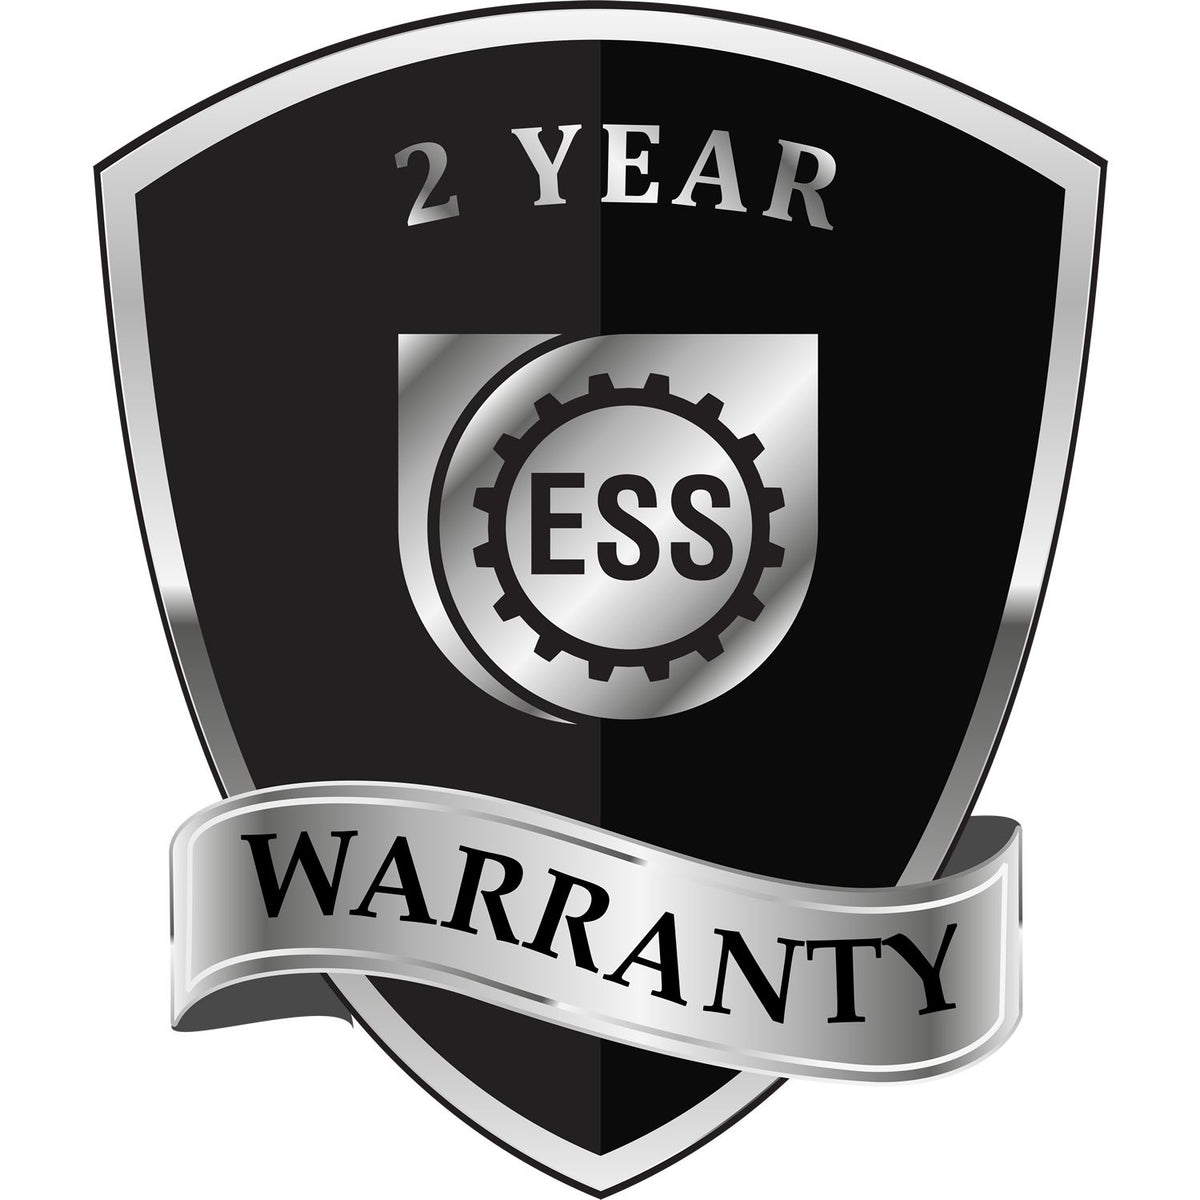 A black and silver badge or emblem showing warranty information for the Hybrid Kansas Architect Seal